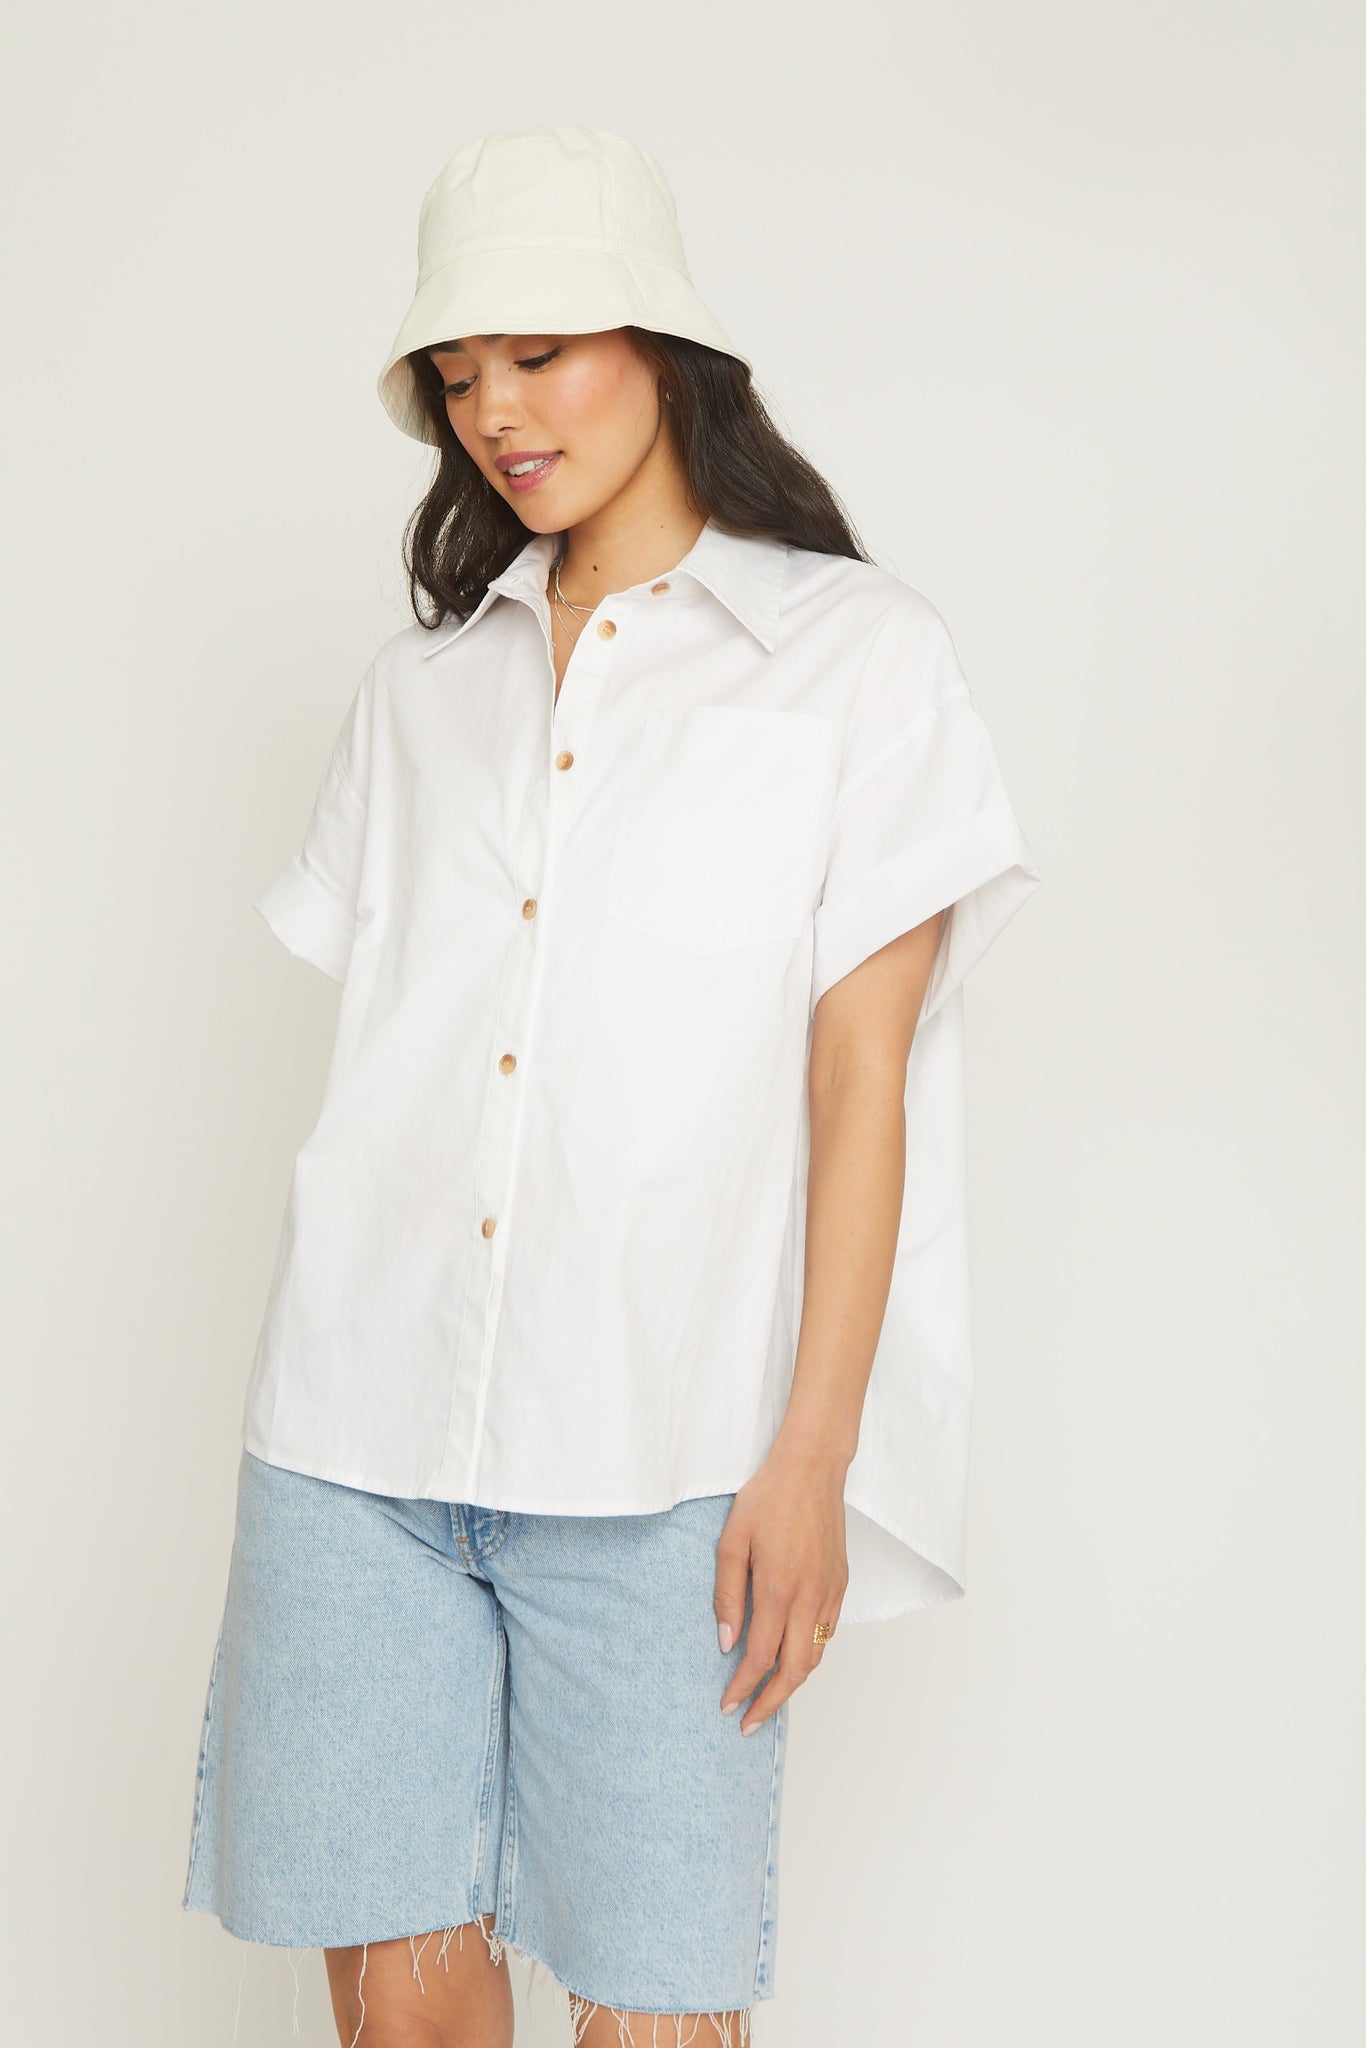 white button down shirt, 100% cotton, short sleeve, boxy, oversized fit, light-weight